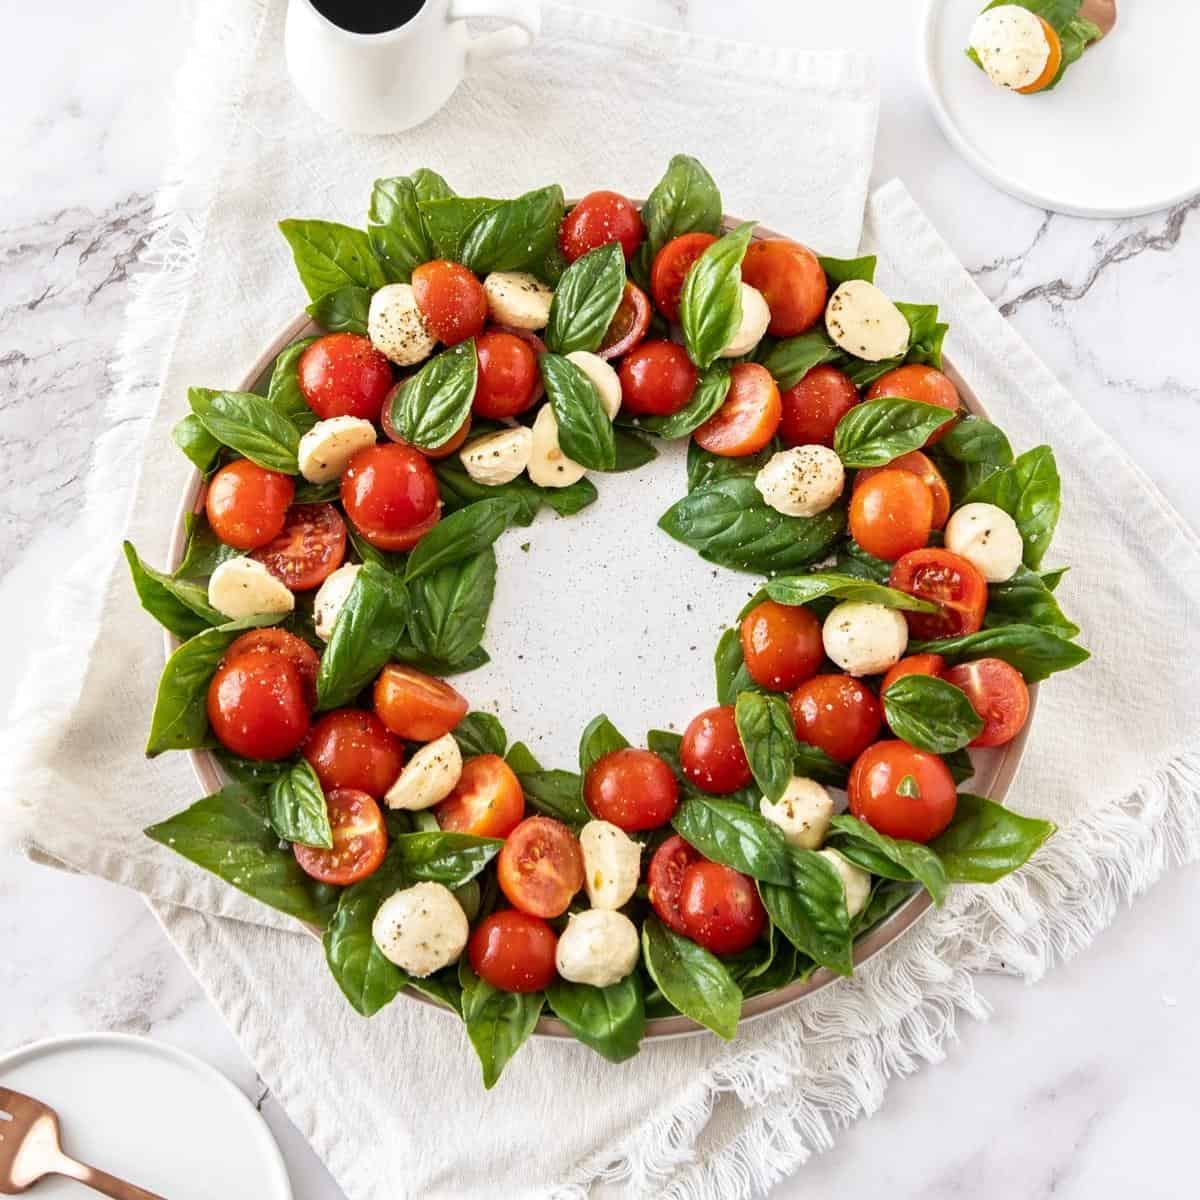 Smoked Salmon Wreath - It's Not Complicated Recipes